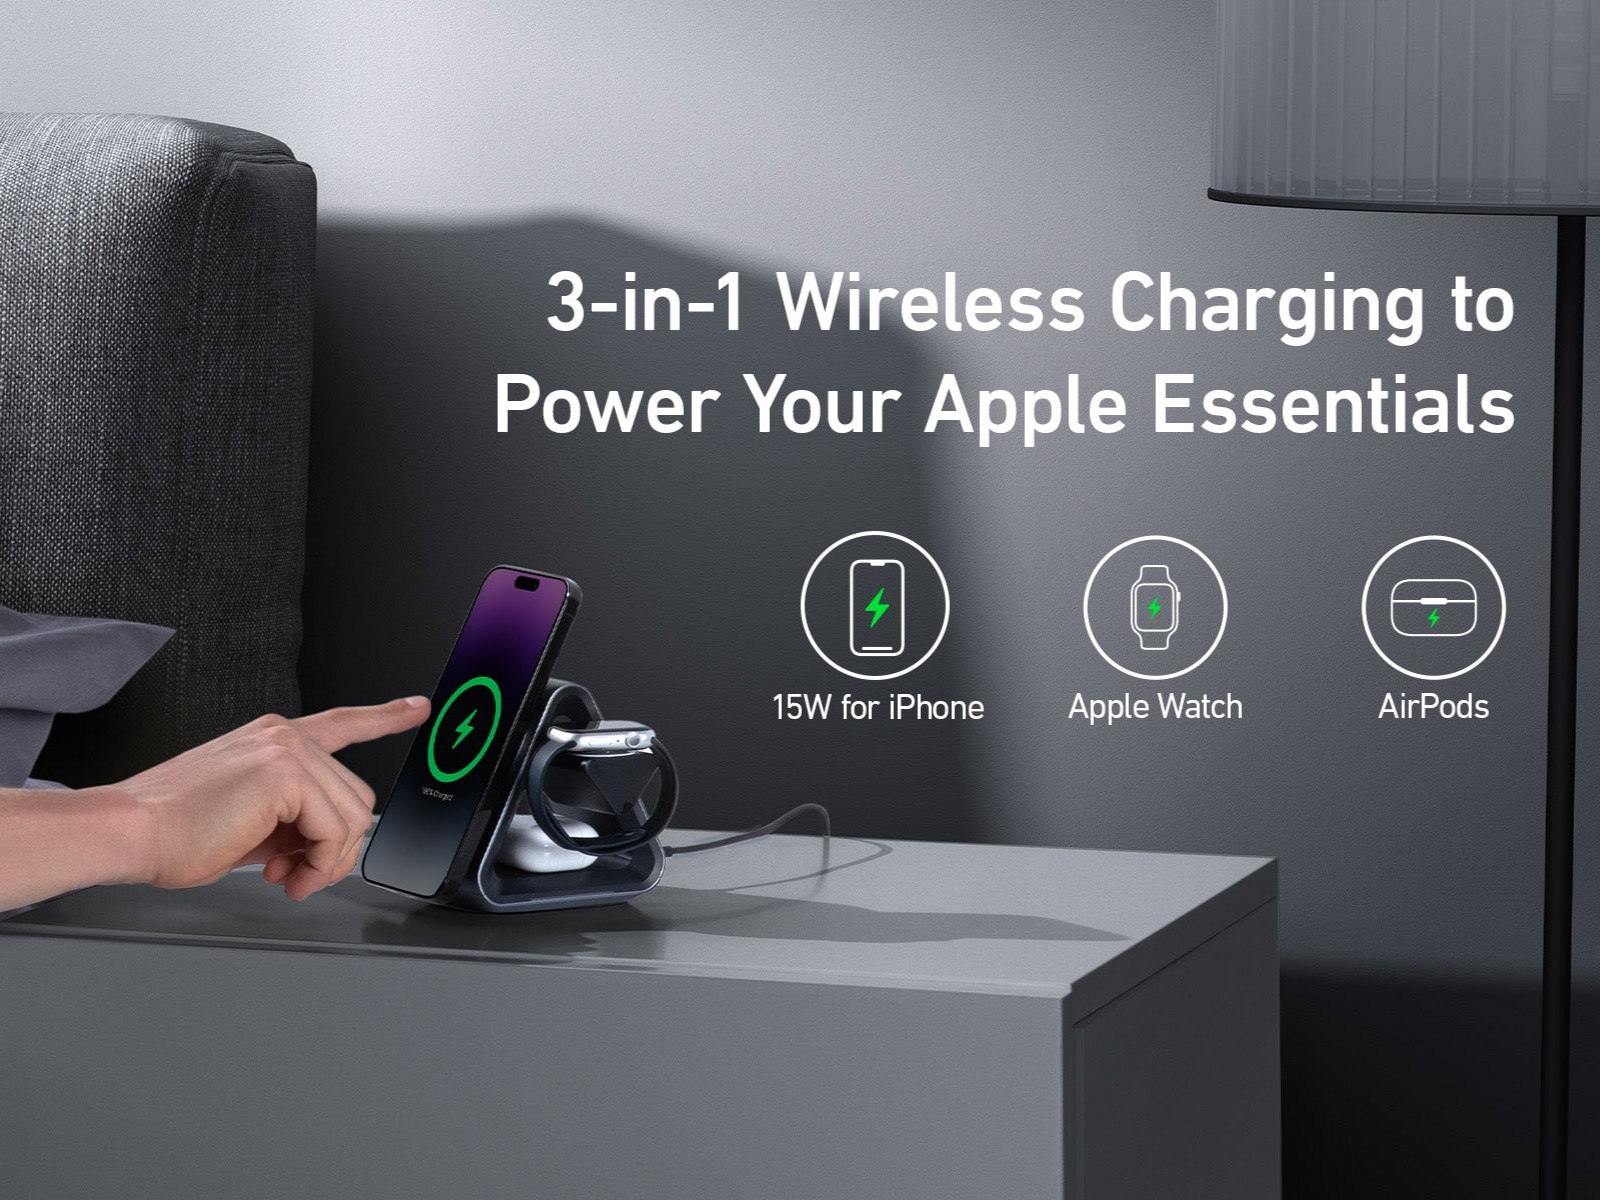 Anker 737 MagGo Charger (3-in-1 Station) for Apple devices now